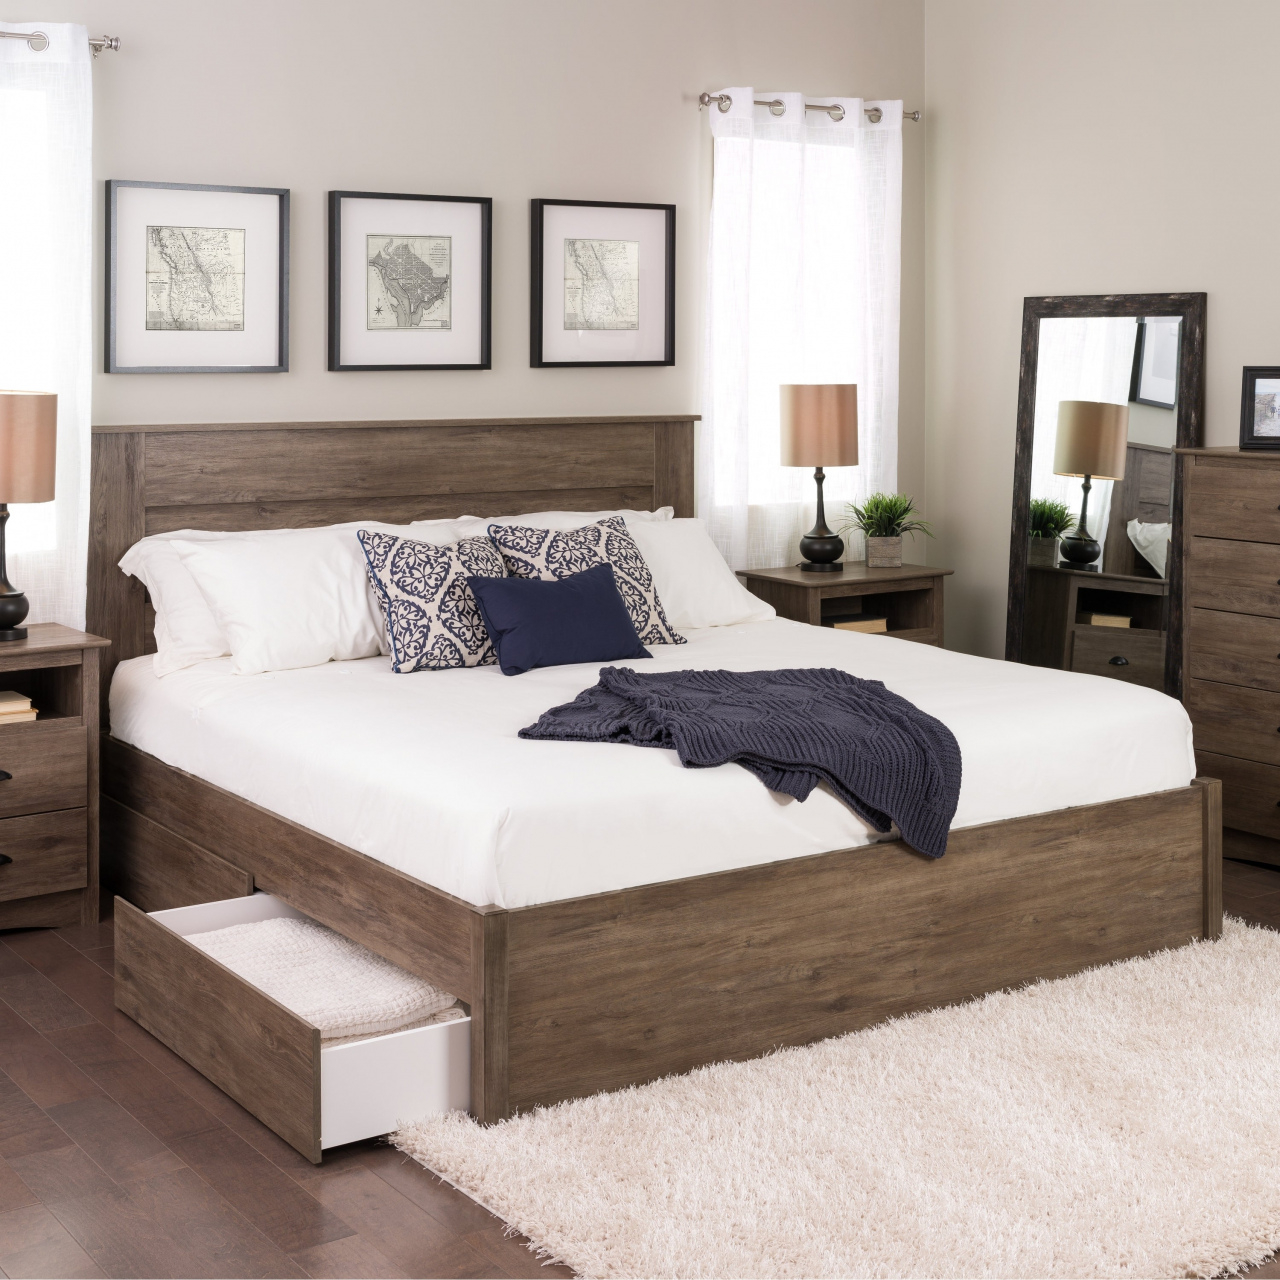 King Size Bedroom Sets At Big Lots Prepac Queen Select 4 Post within size 1280 X 1280